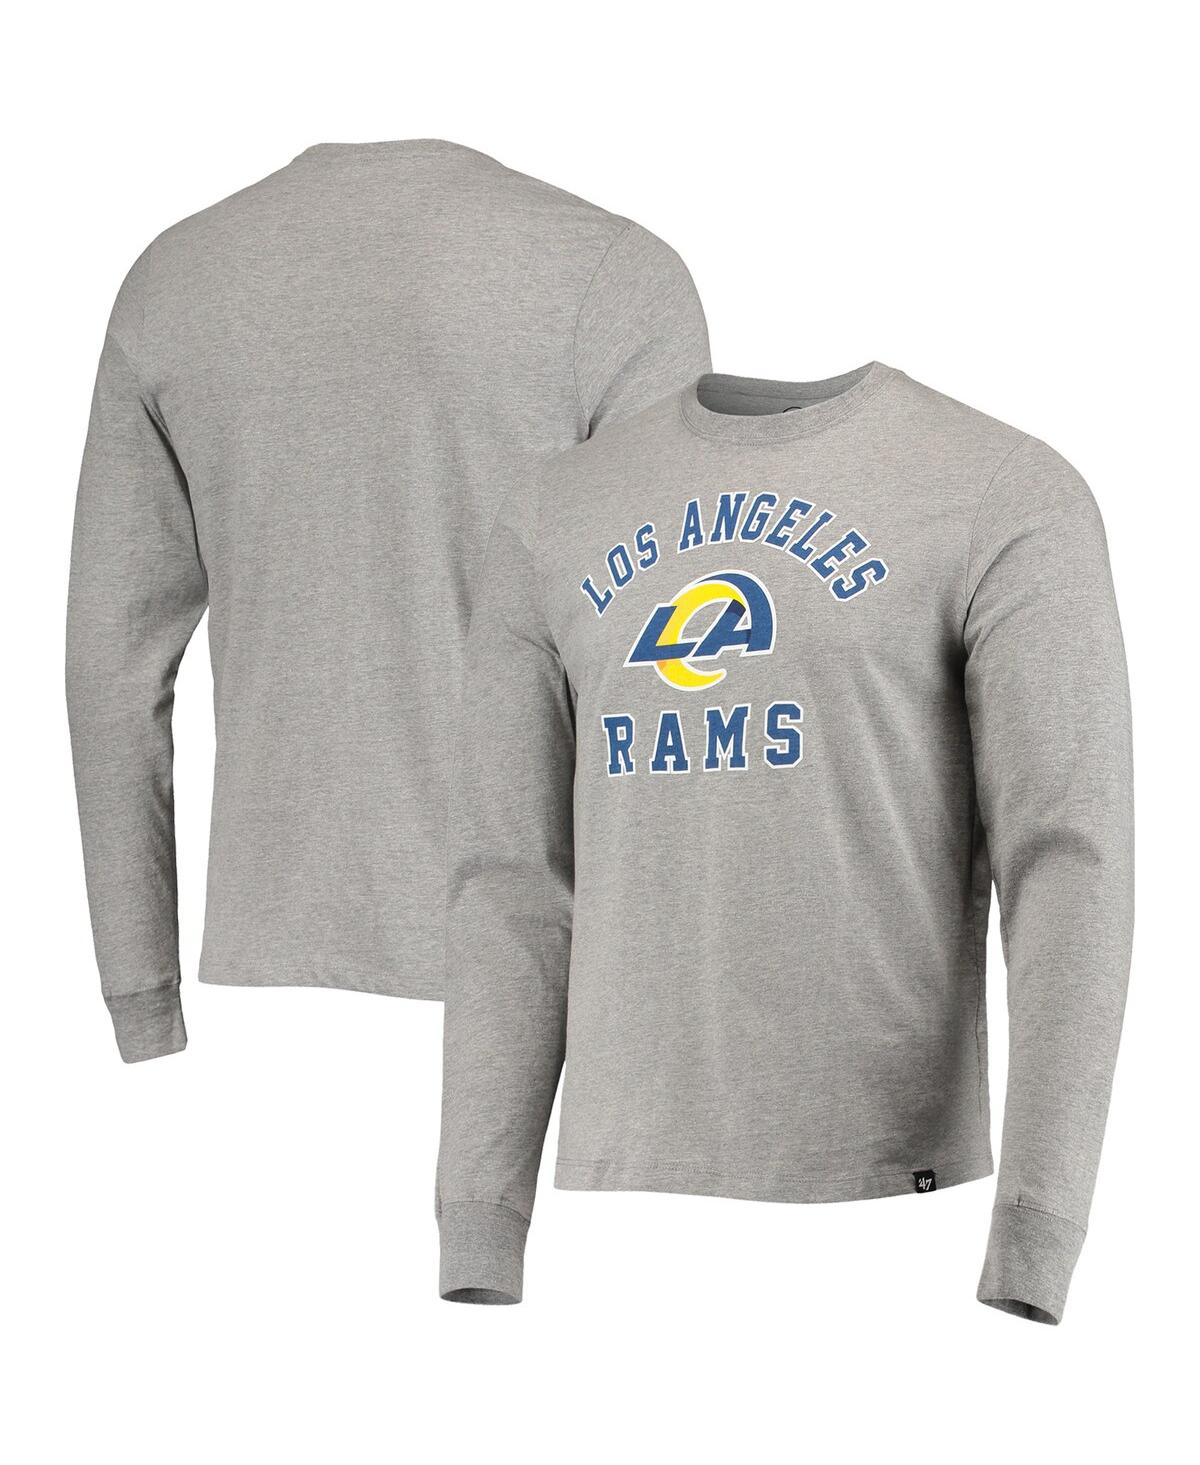 Men's '47 Brand Heathered Gray Los Angeles Rams Arch Super Rival Long Sleeve T-shirt - Heathered Gray